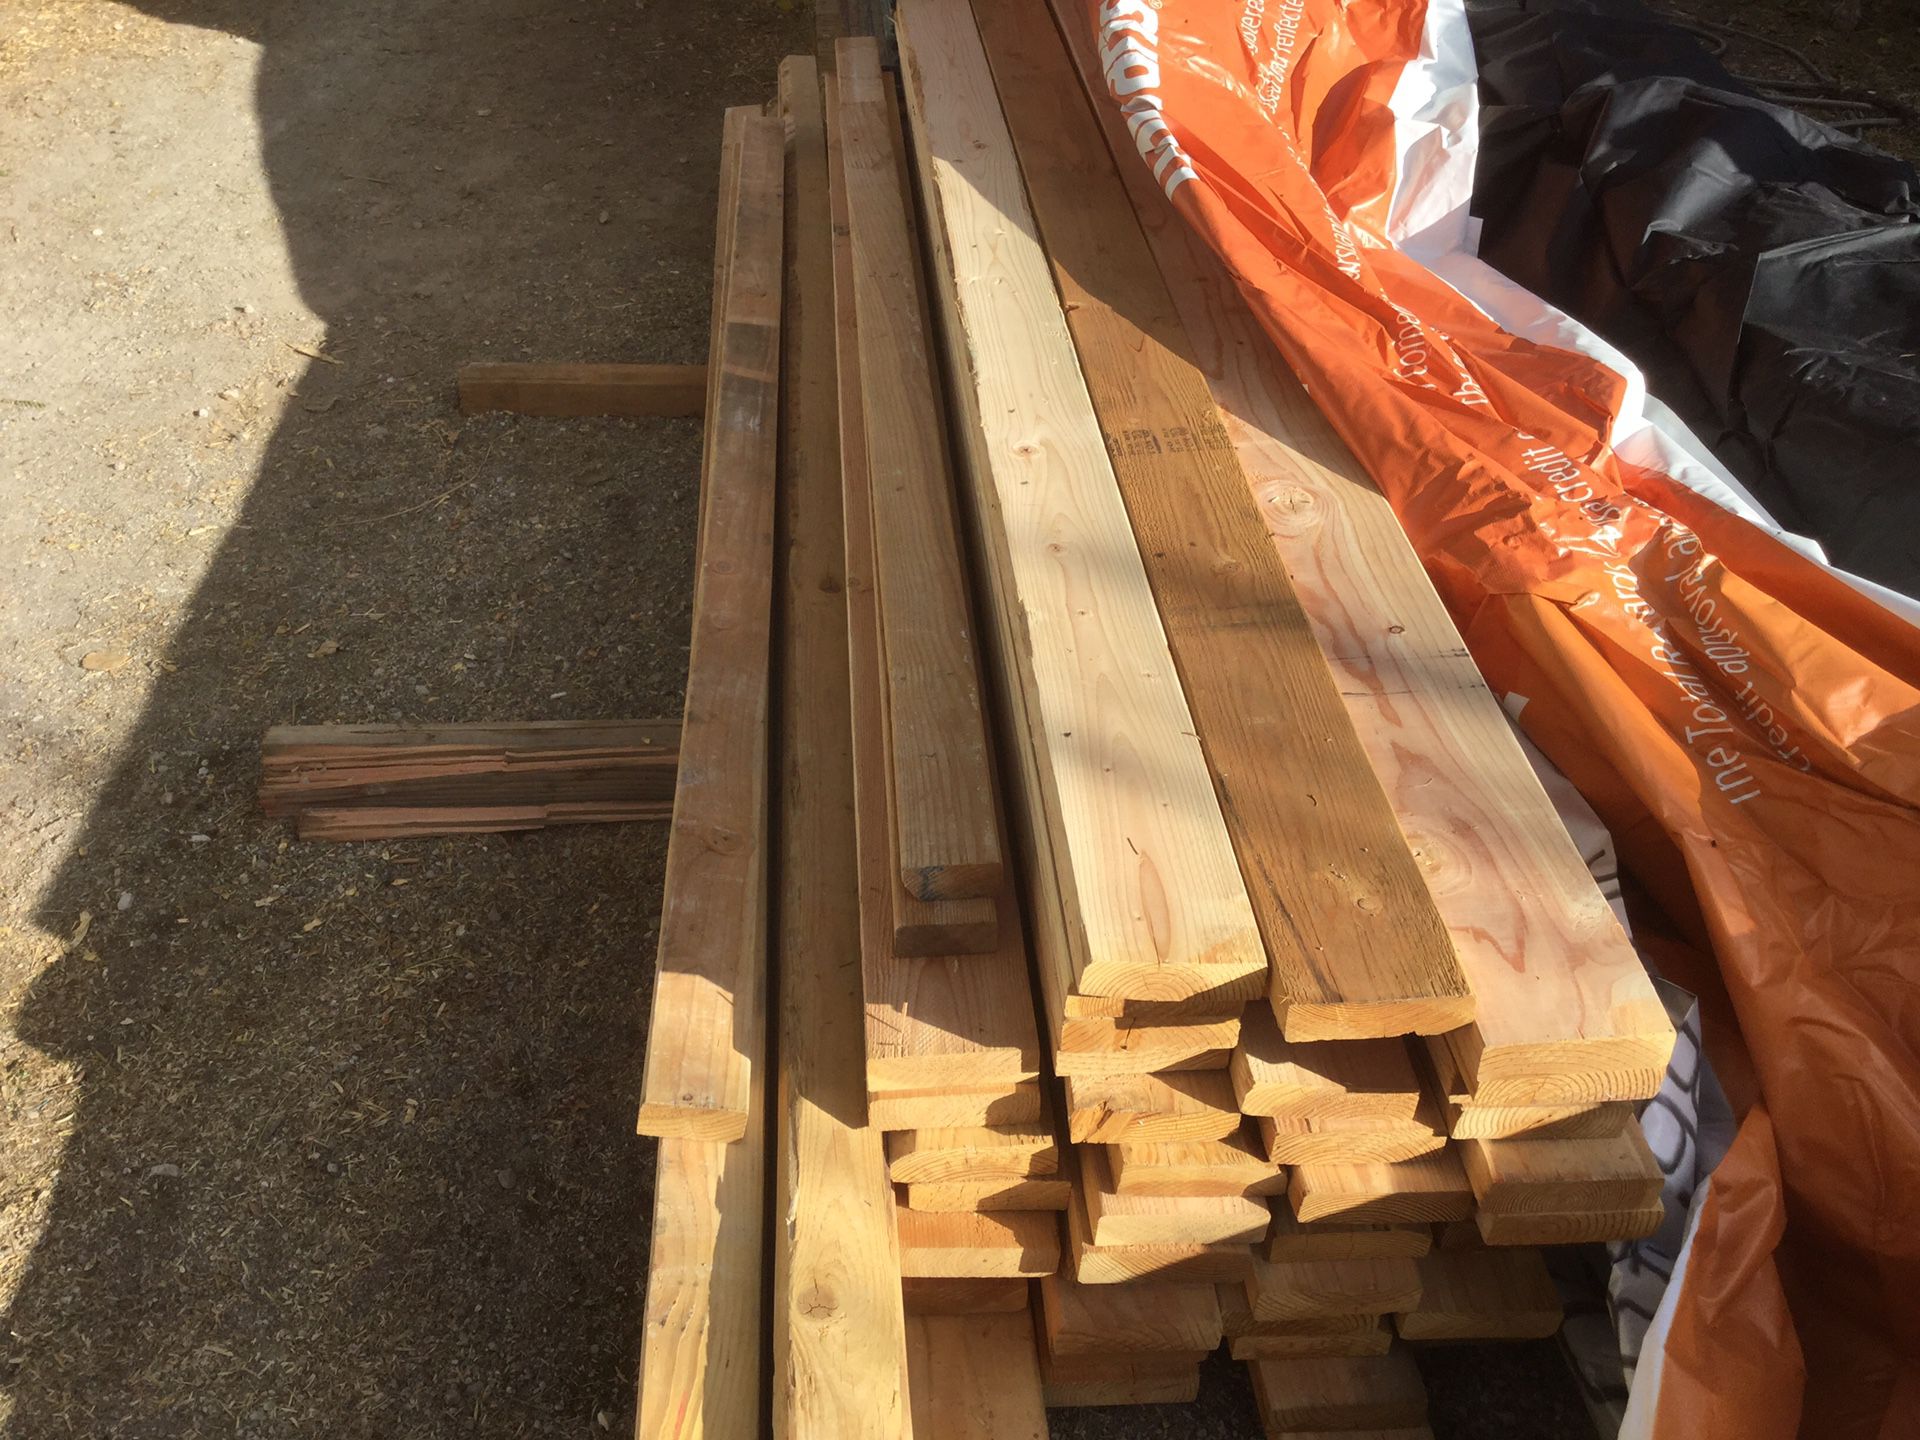 Lumber 2x4. 2x6 2x8 And plywood 4x8 1/2 sheets